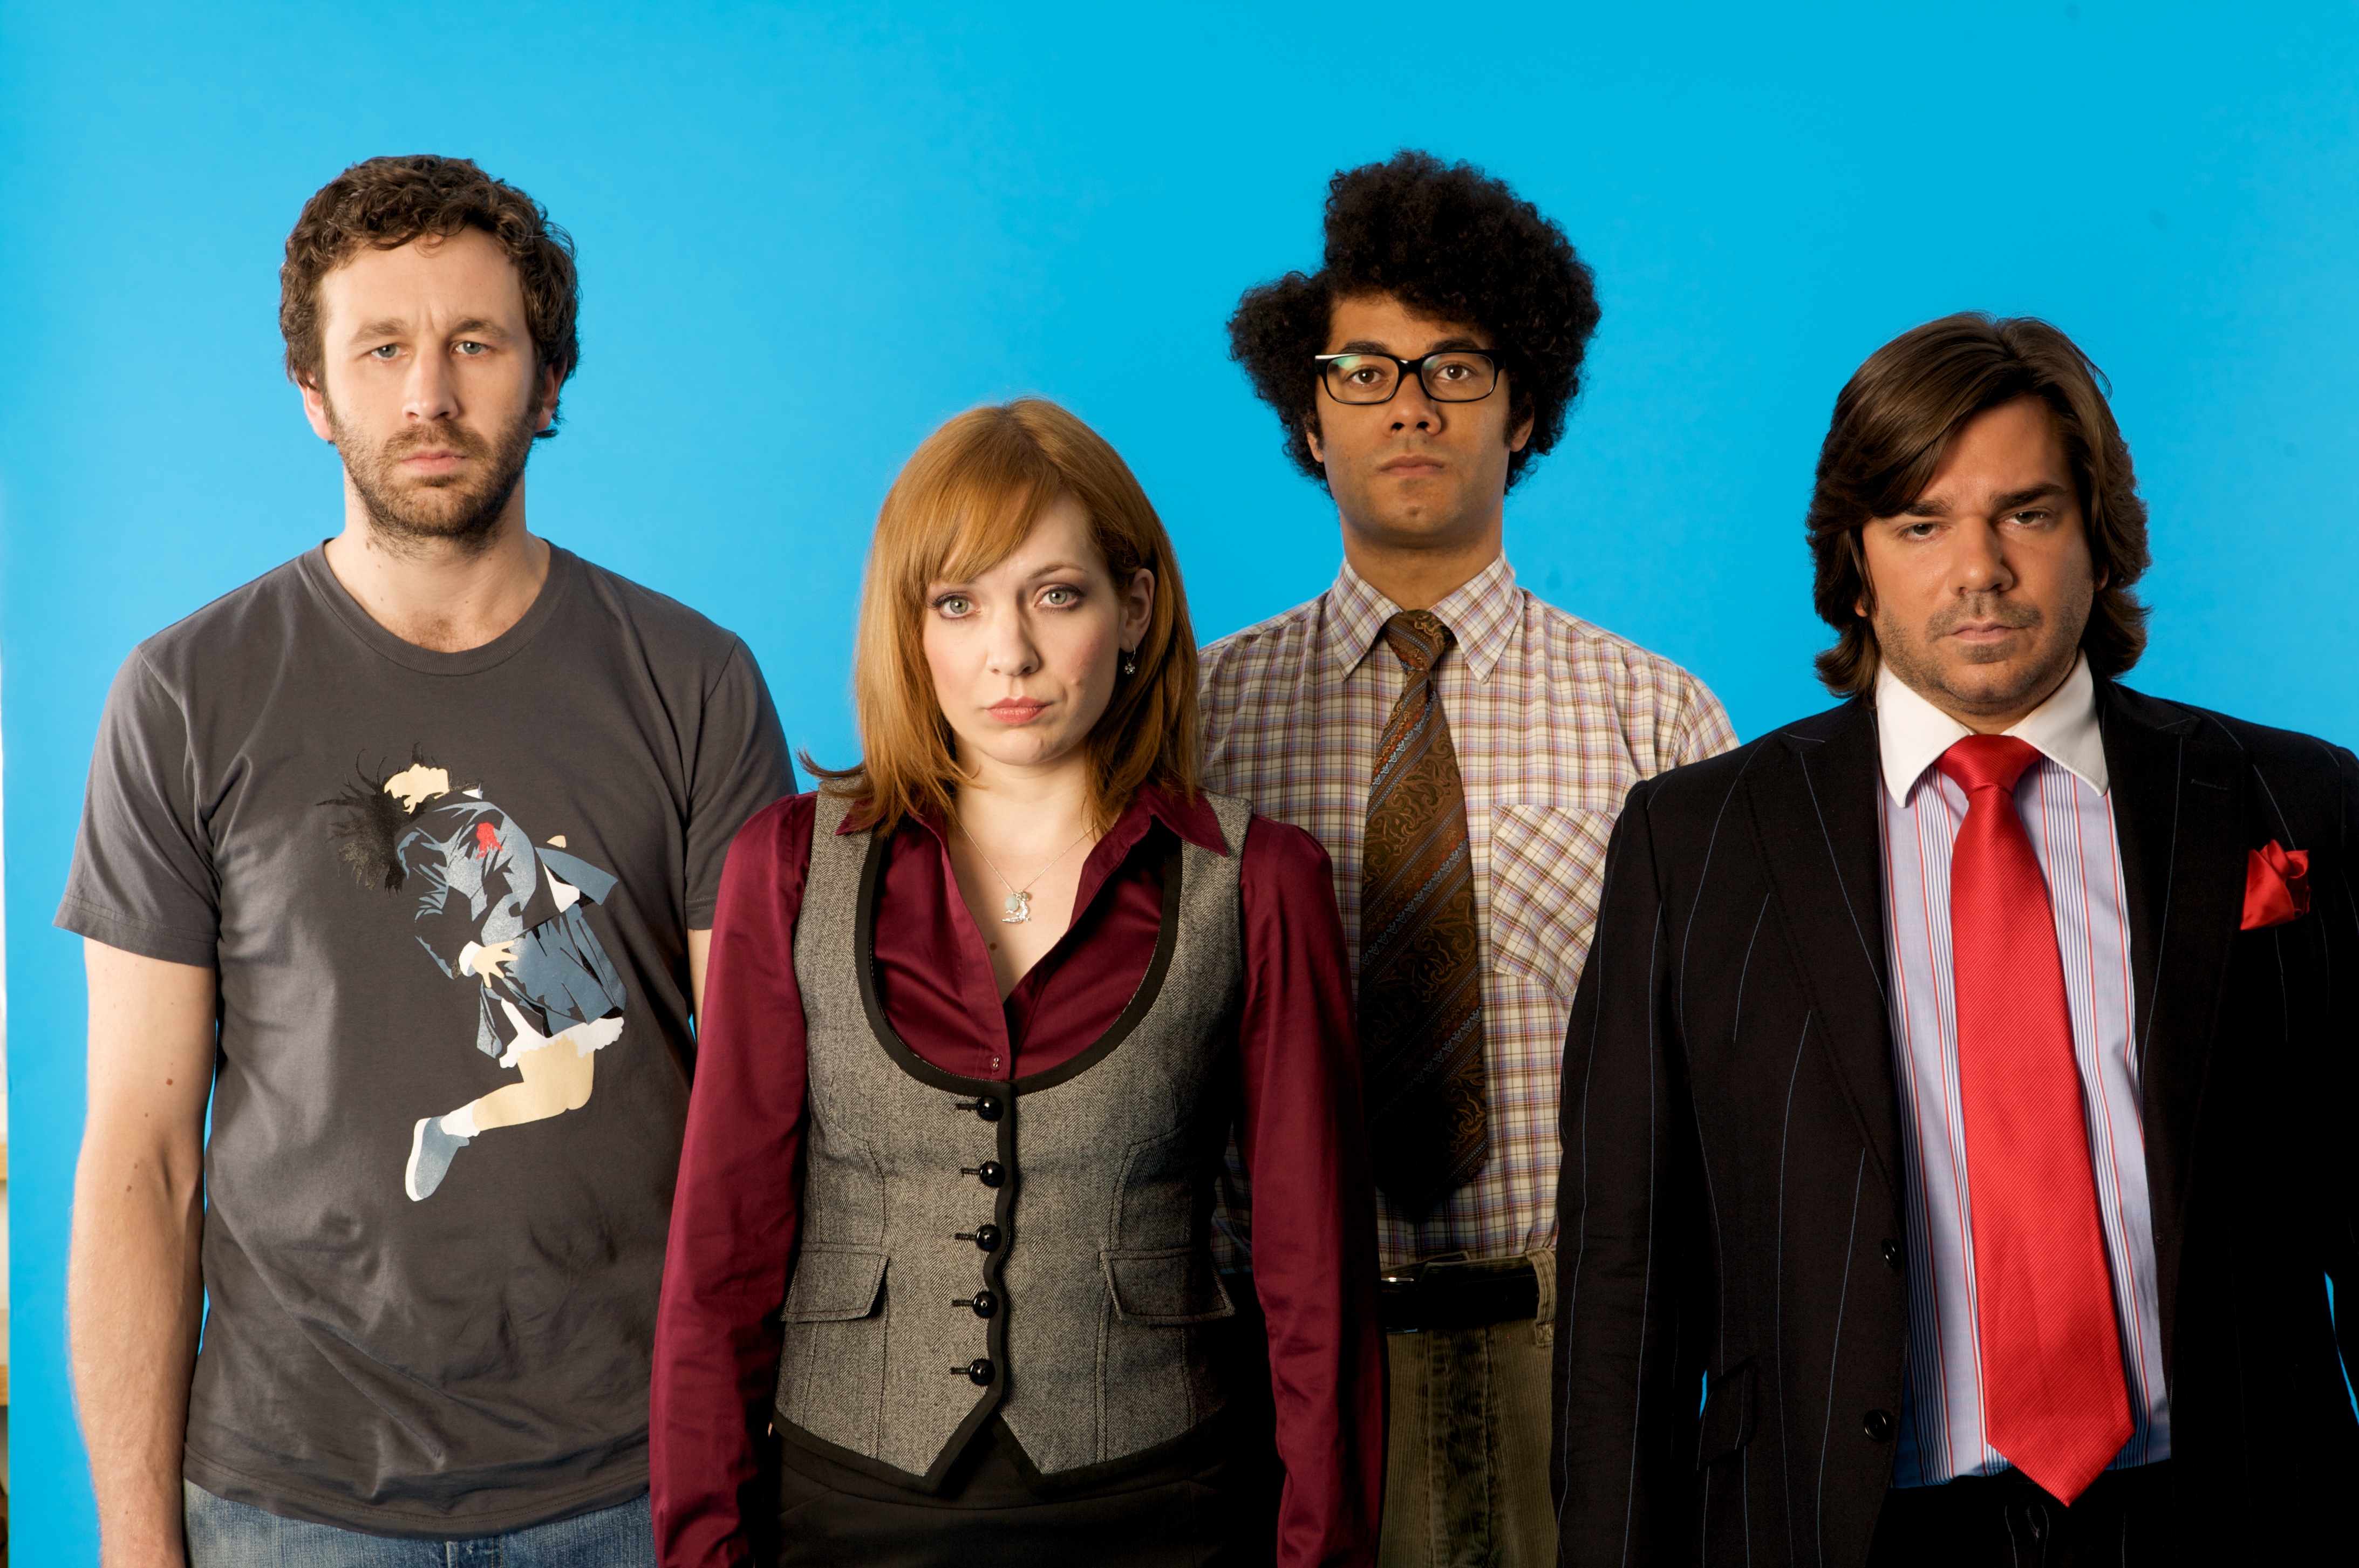 The It Crowd Wallpapers